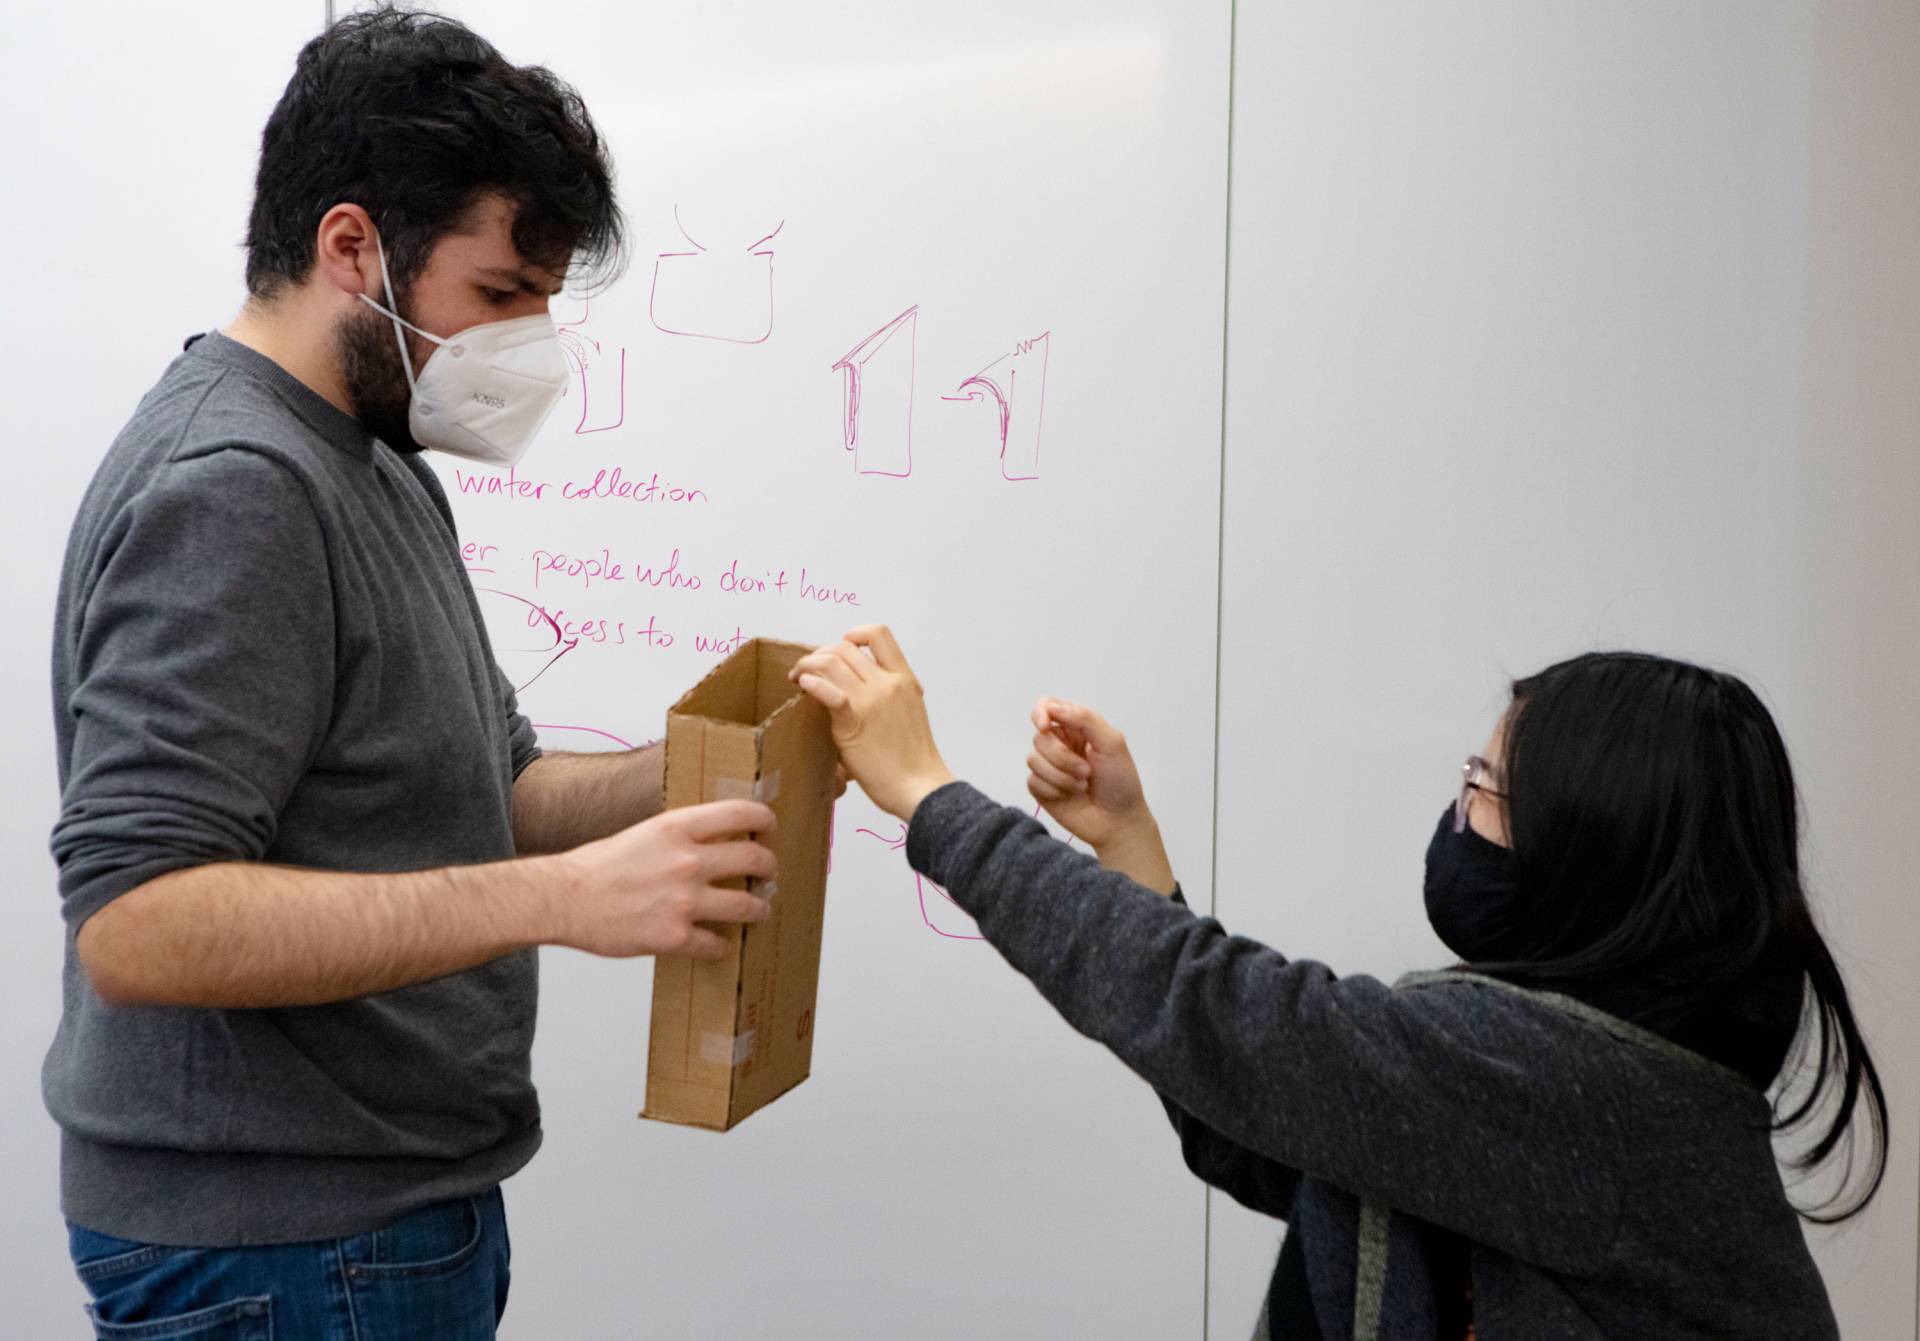 A male student holds a box for a female student